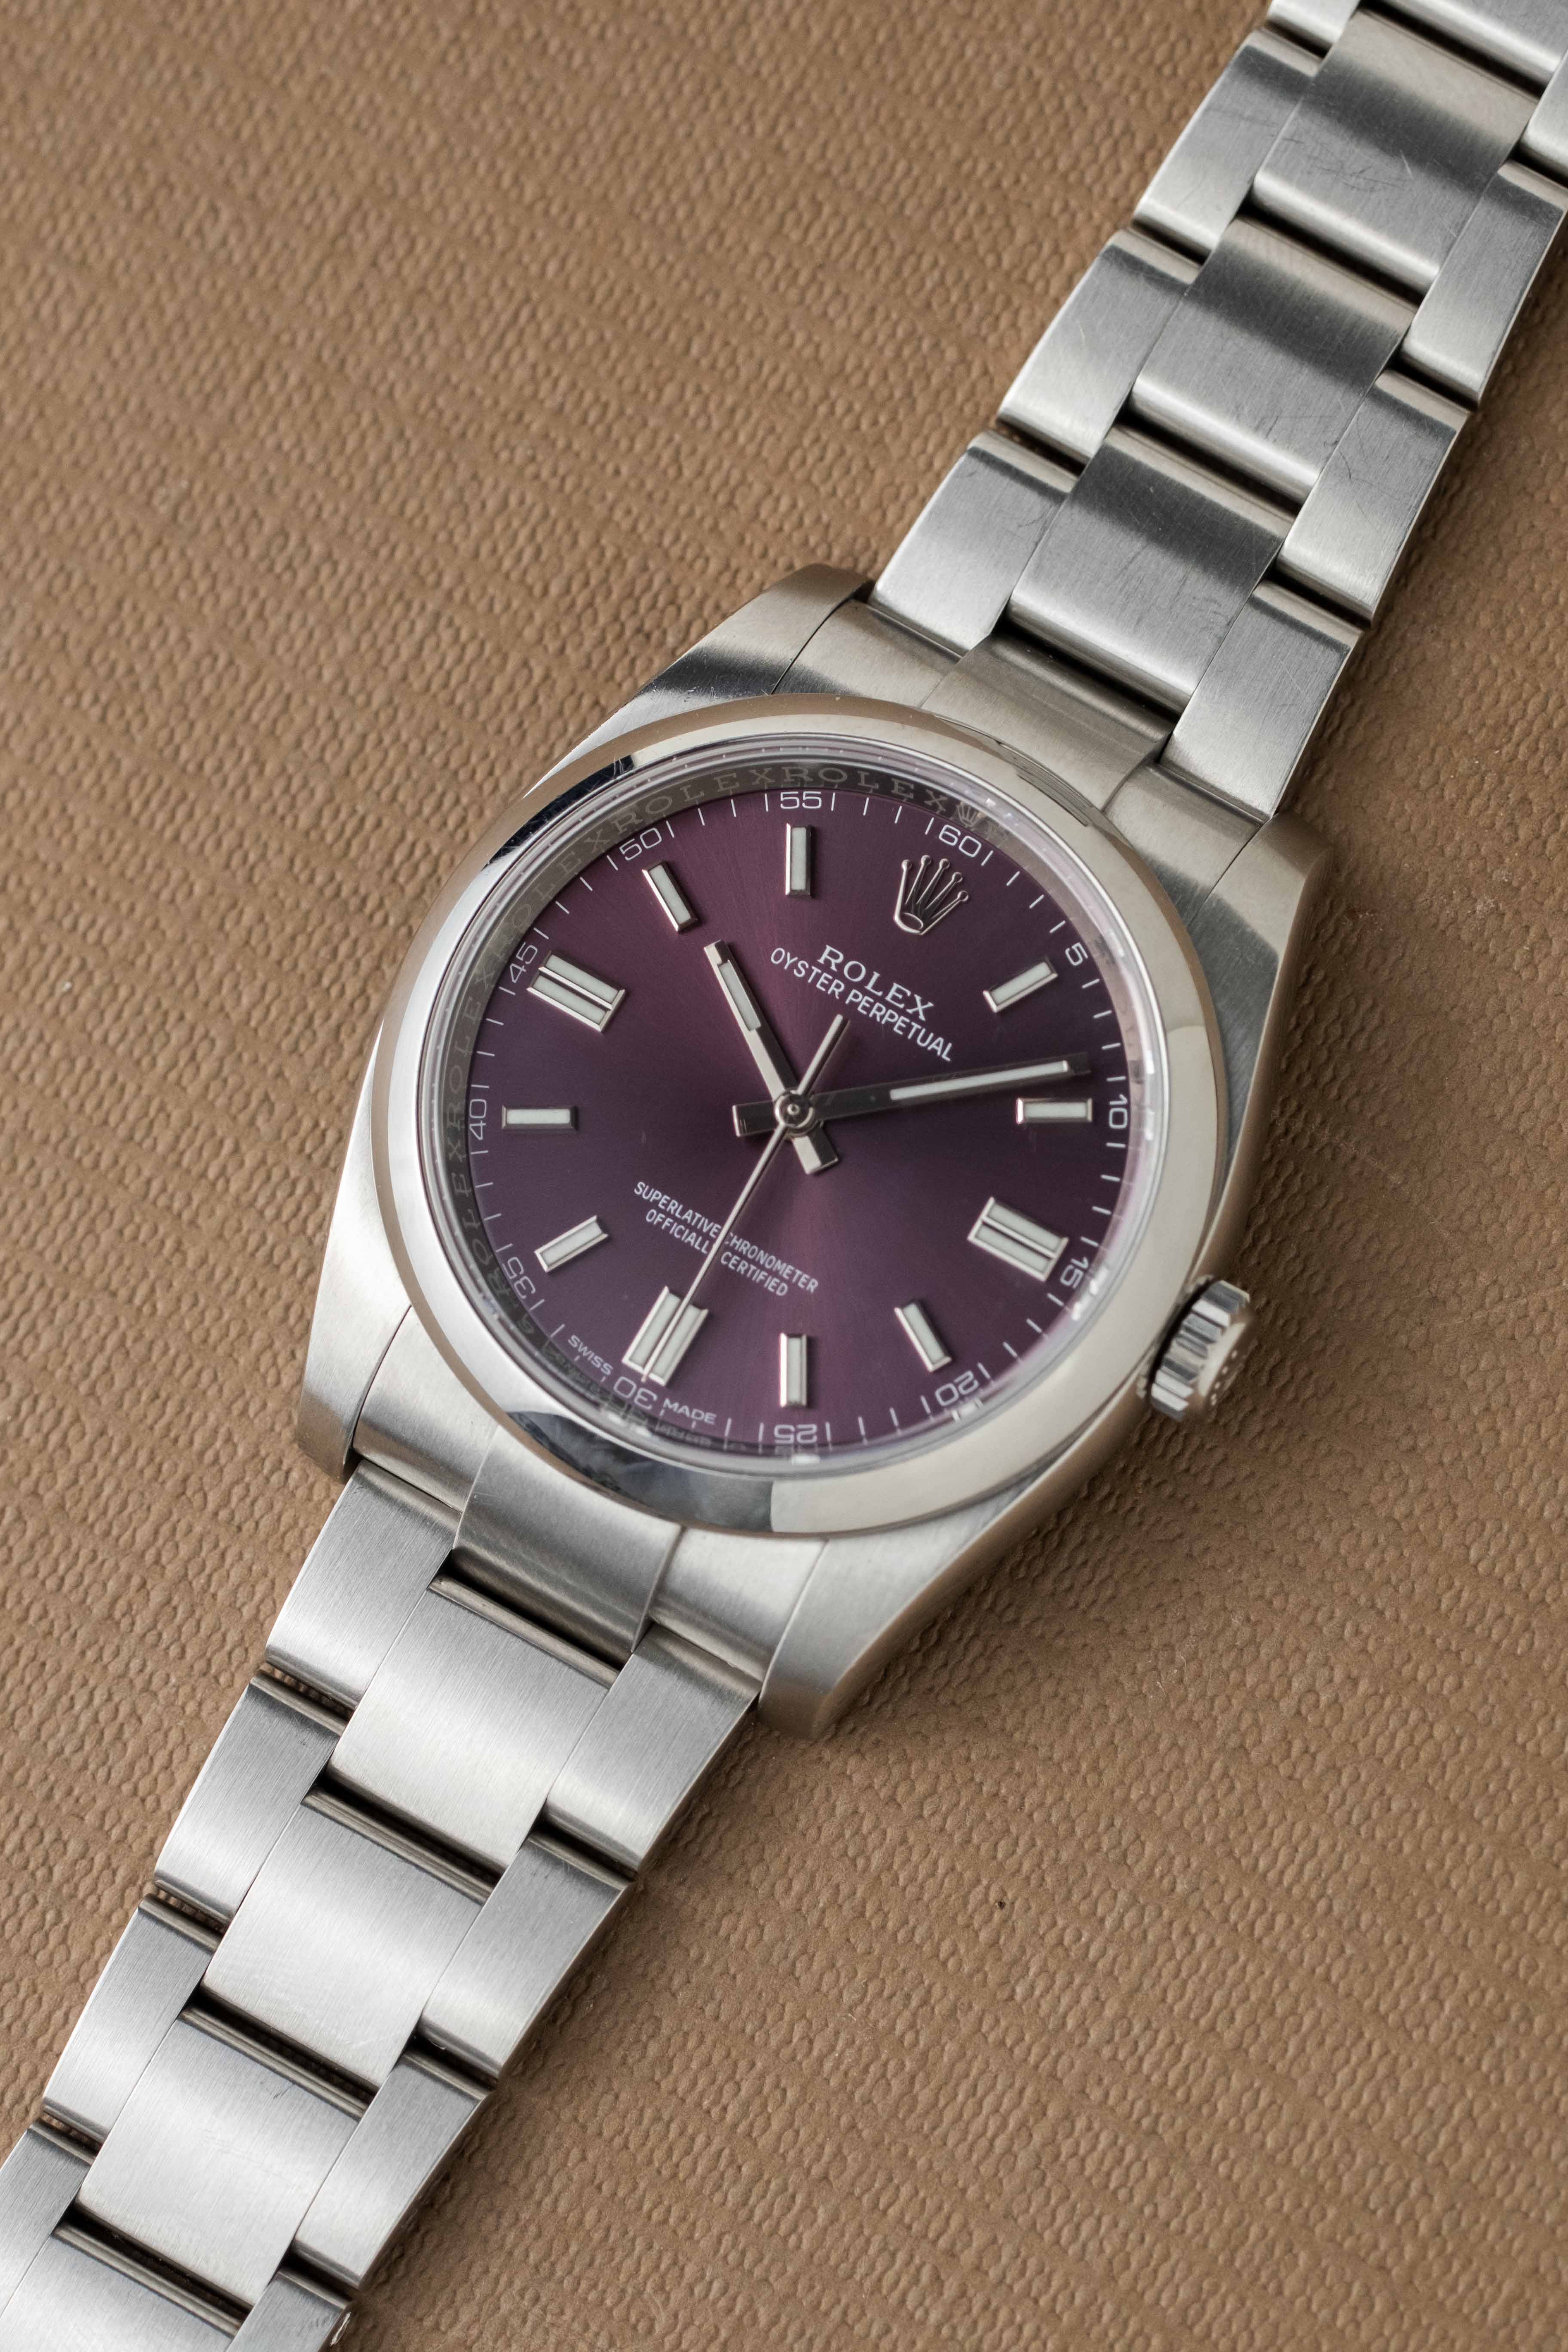 Rolex Oyster Perpetual 36 Ref. 116000 'Grape' Dial 2016 w/ Box & Papers